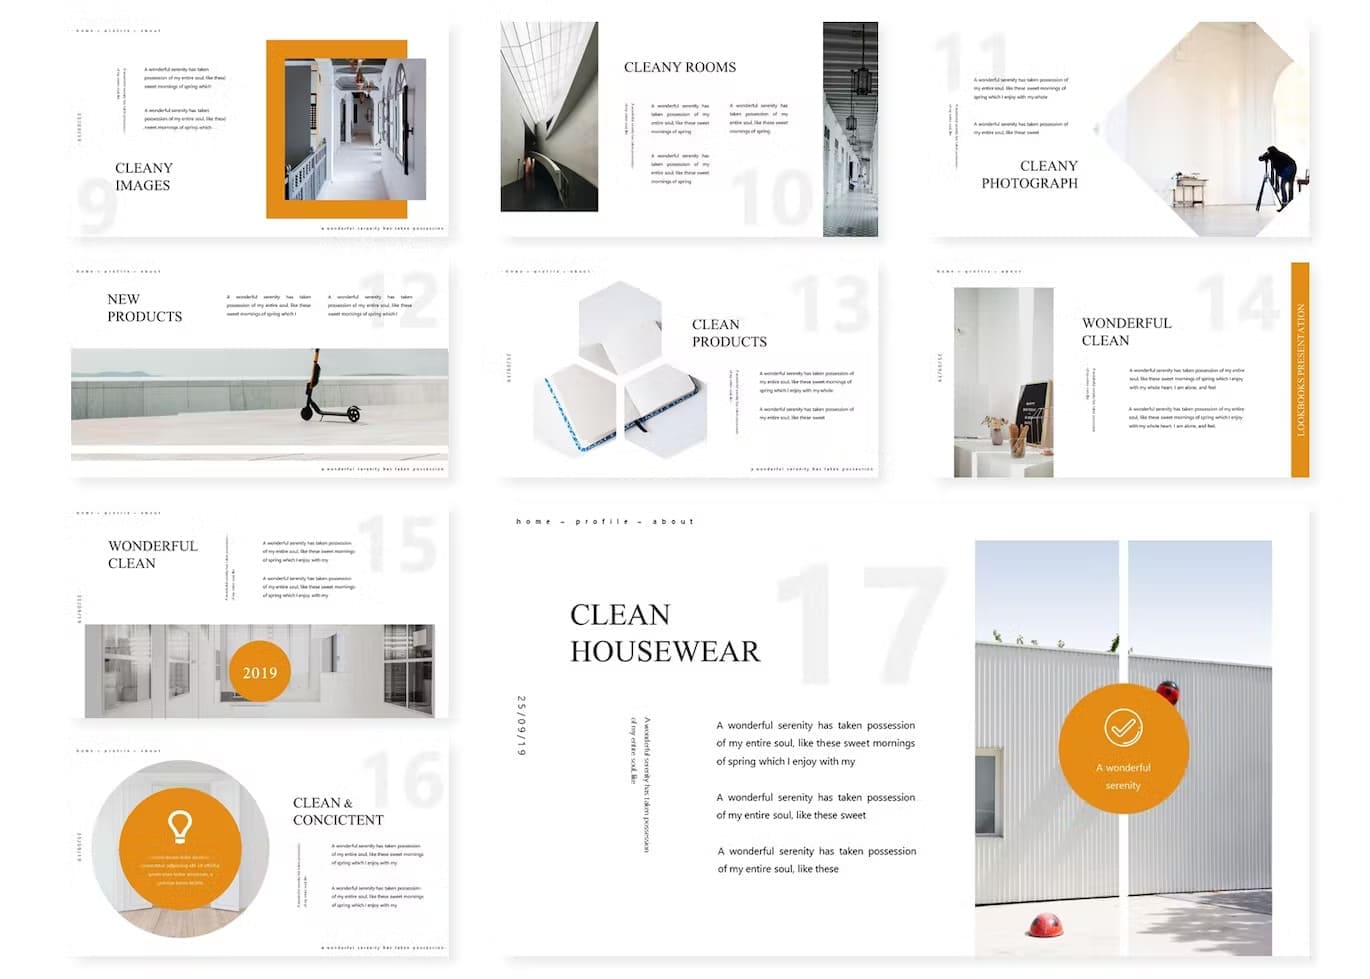 Clean housewear of Cleastyle Powerpoint template.